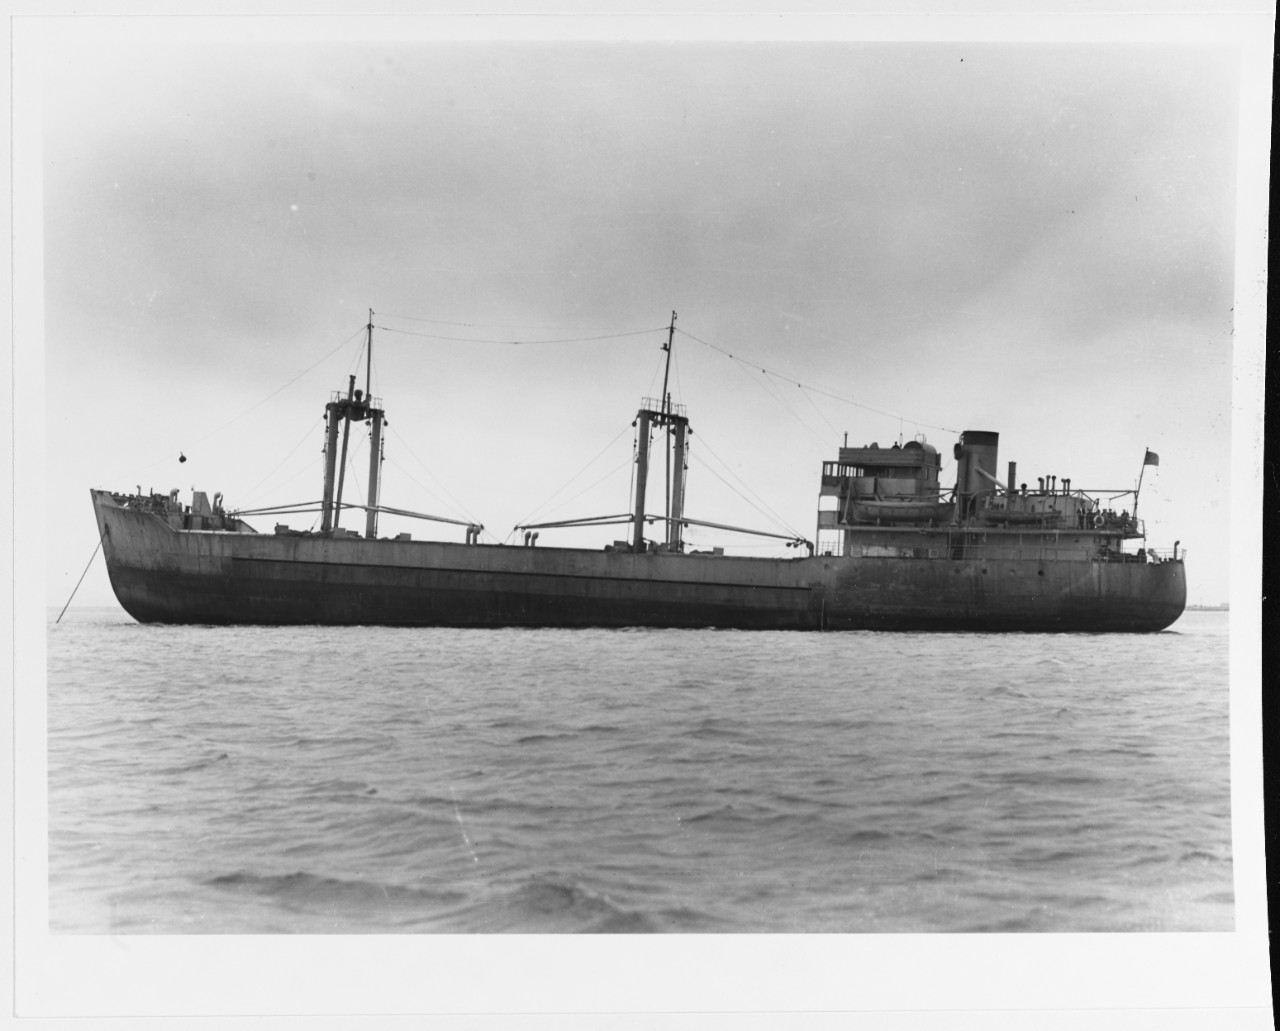 S.S. A. ANDREEV (Soviet Merchant Cargo Ship, 1936-1966, under this name 1936-1962)